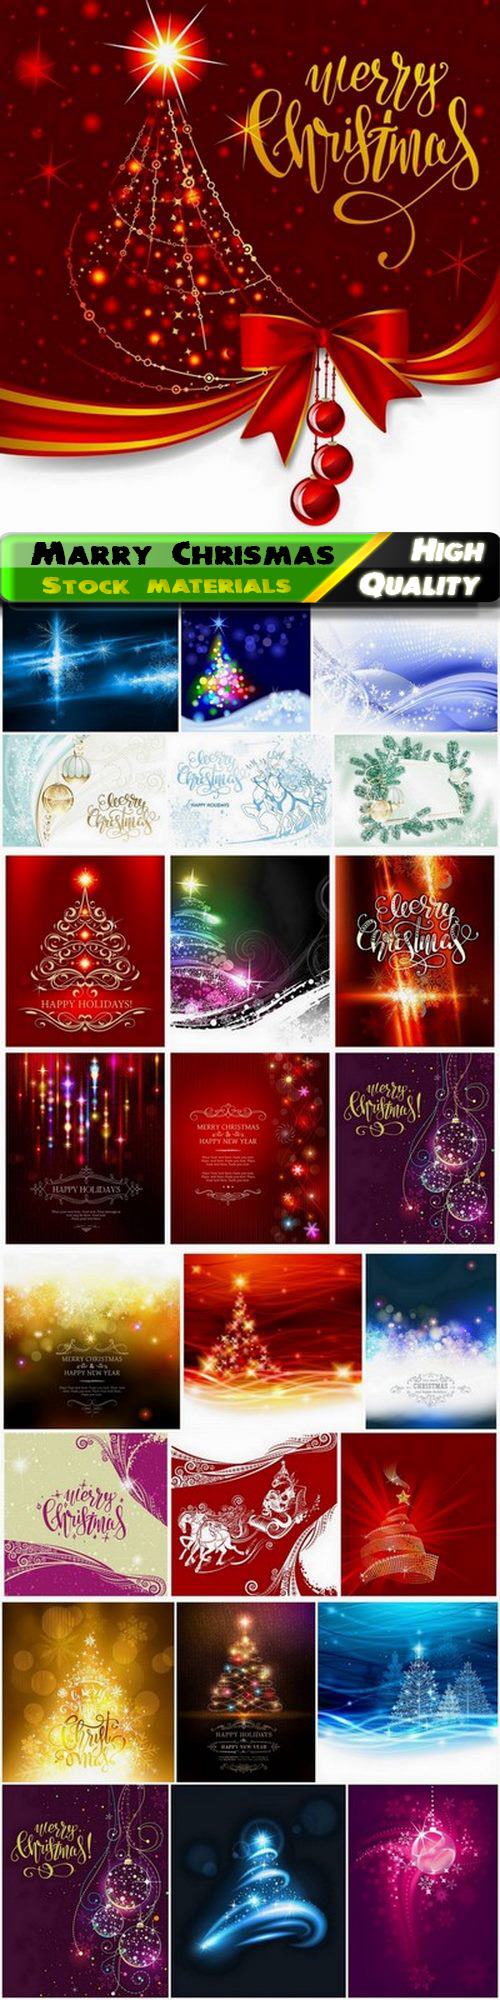 Merry Christmas and  happy New Year holiday card - 25 Eps